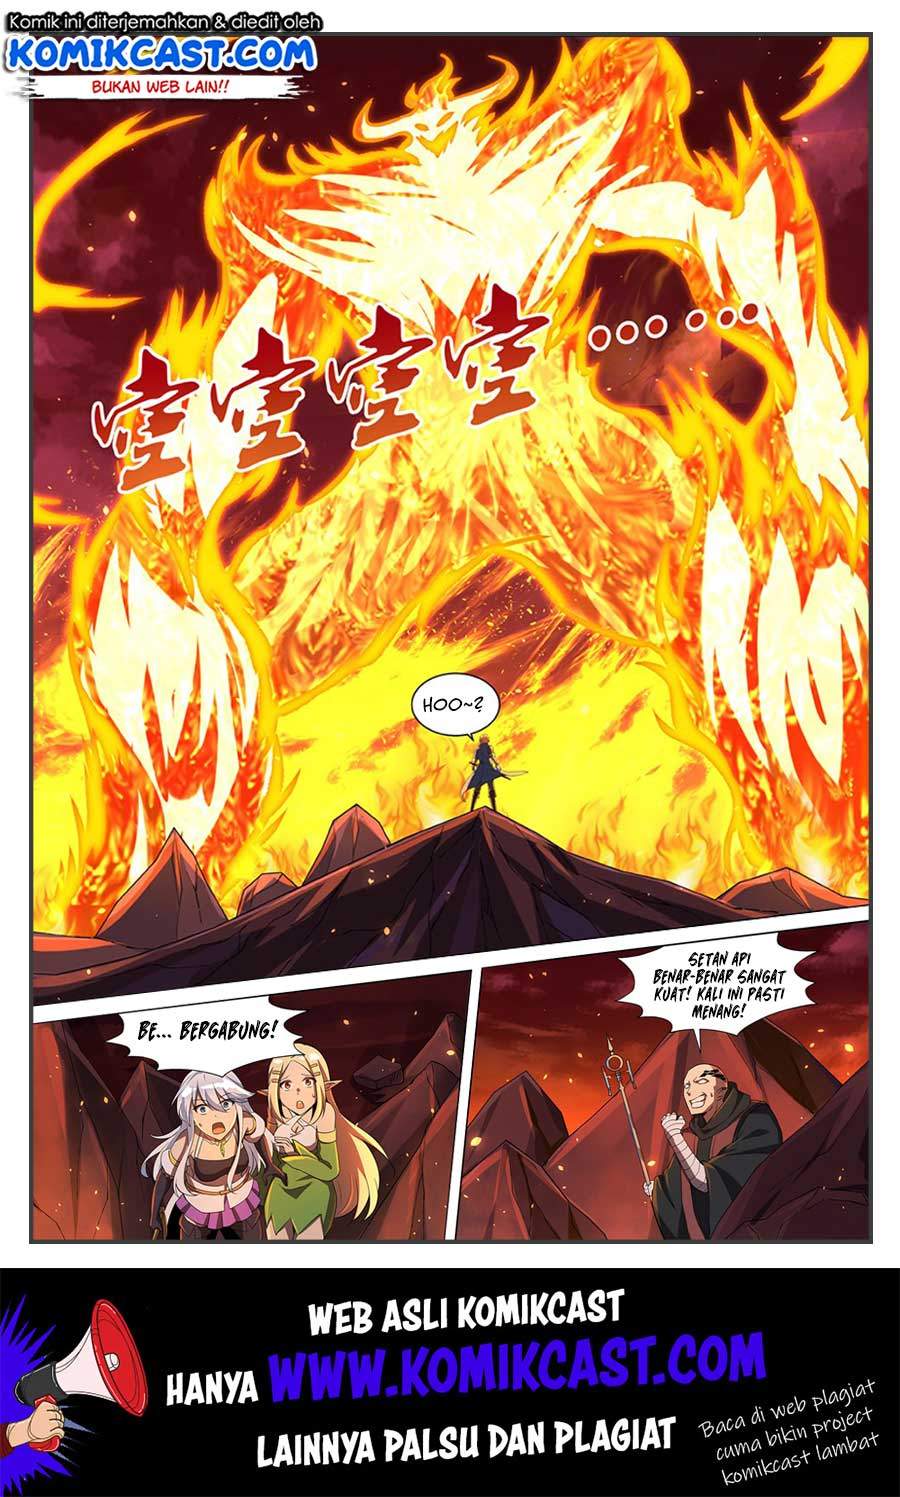 The Demon King Who Lost His Job Chapter 68 Bahasa Indonesia